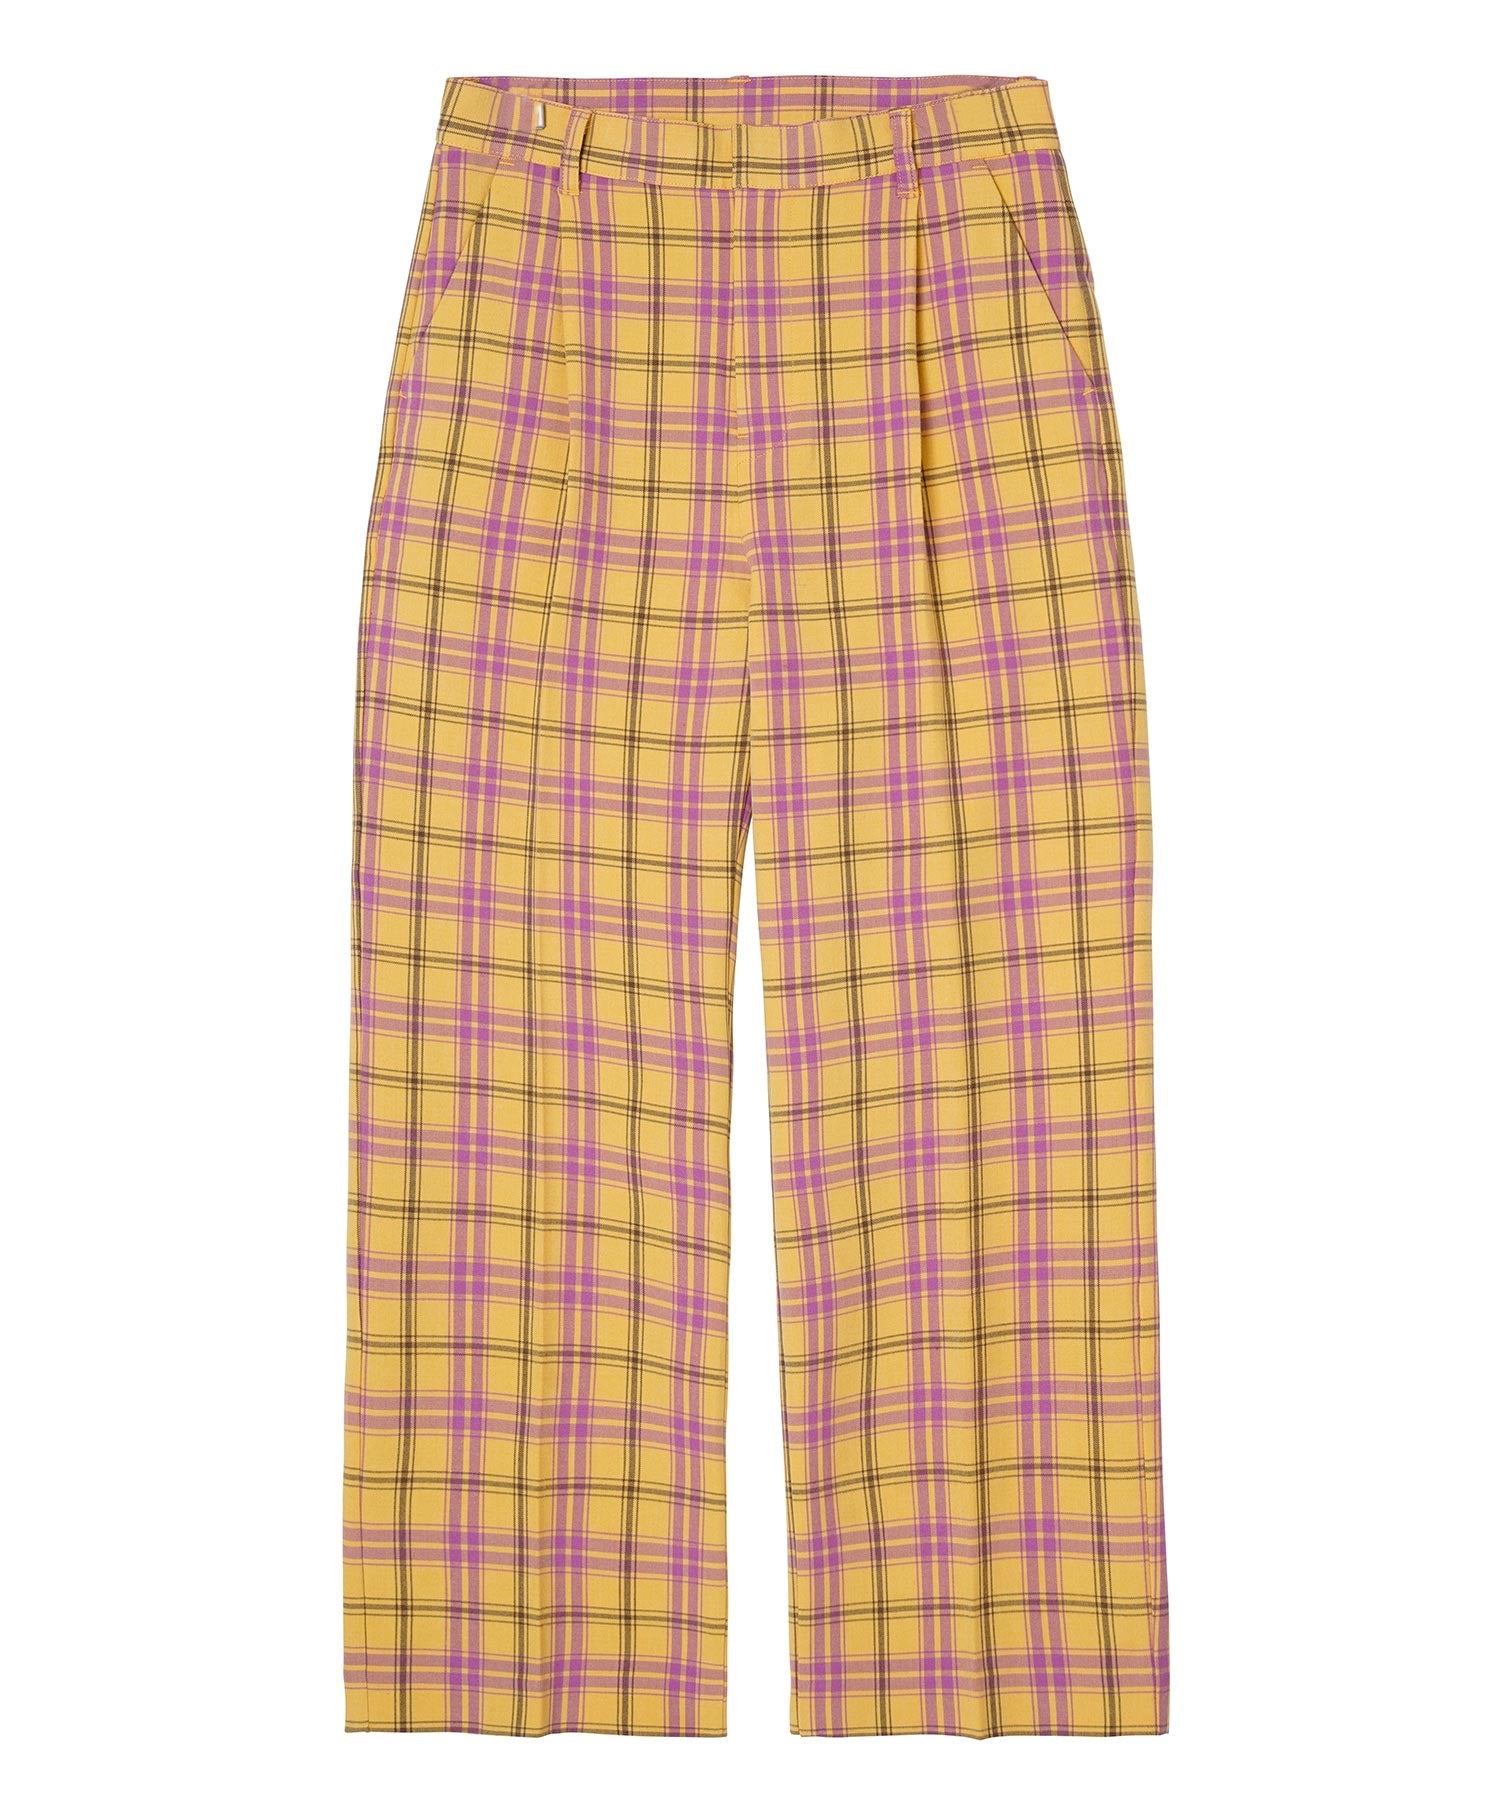 Topshop Cigarette Trousers In Scuba Laundry Check 93% Polyester 7% Elastane  Wash With Similar Colours, $84 | Topshop | Lookastic